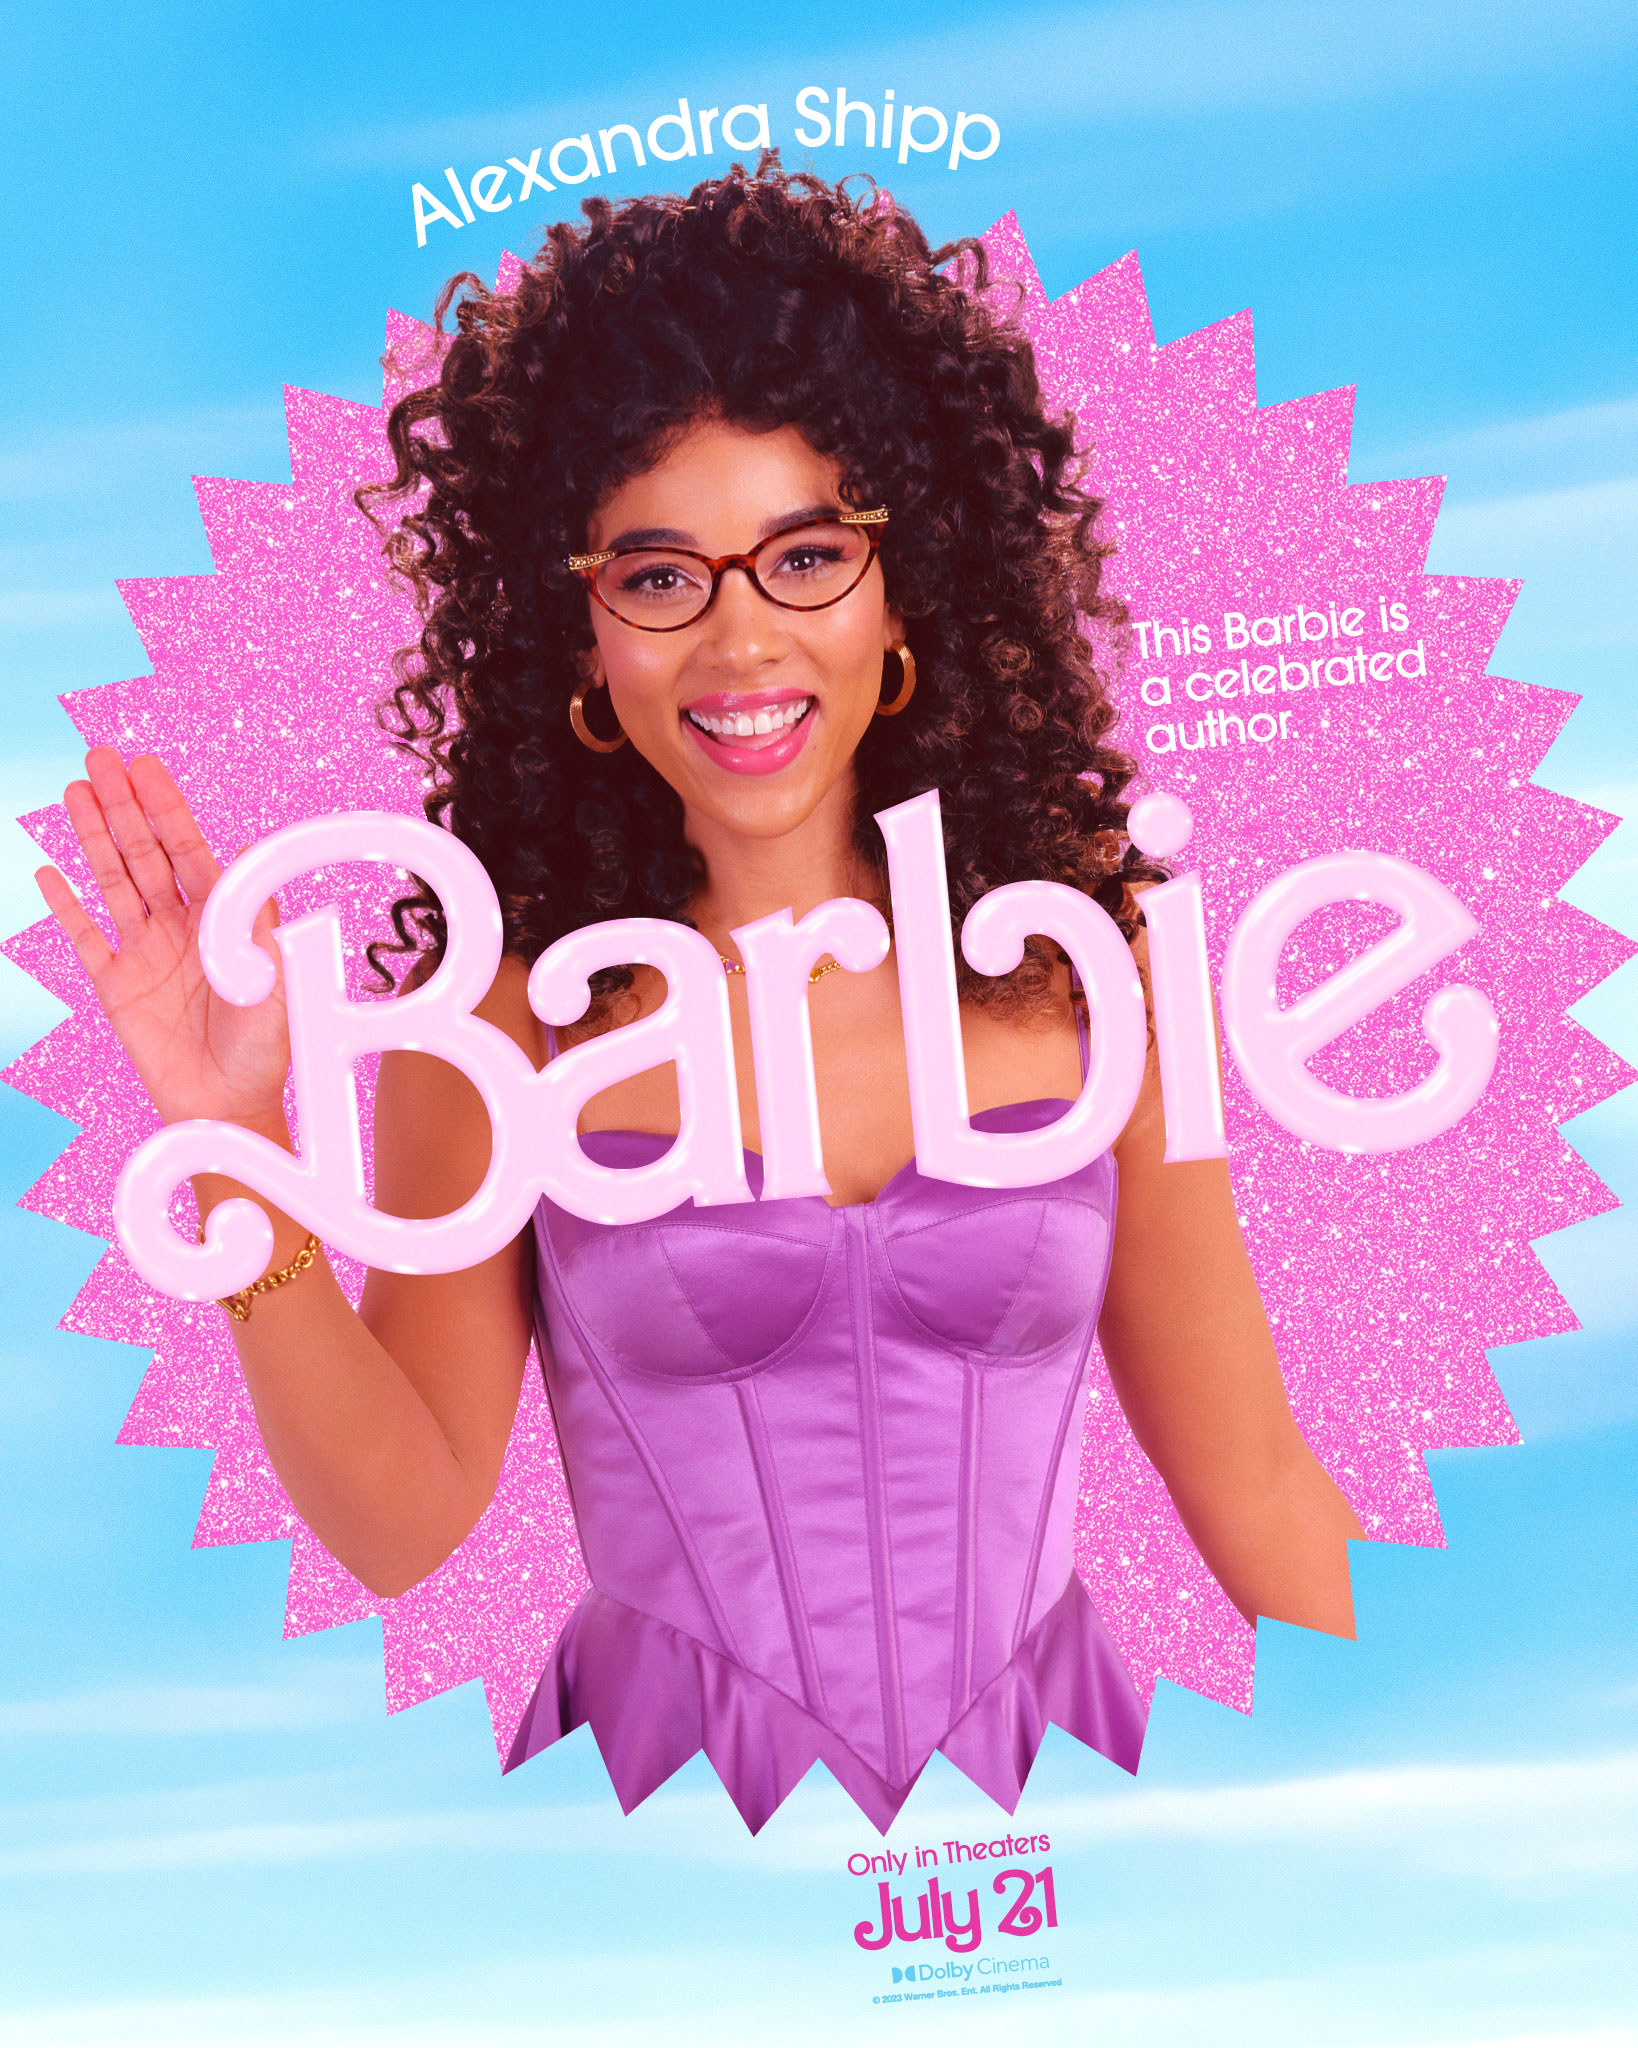 Alexandra Shipp on a Barbie poster waving and wearing eyeglasses and a corsette dress